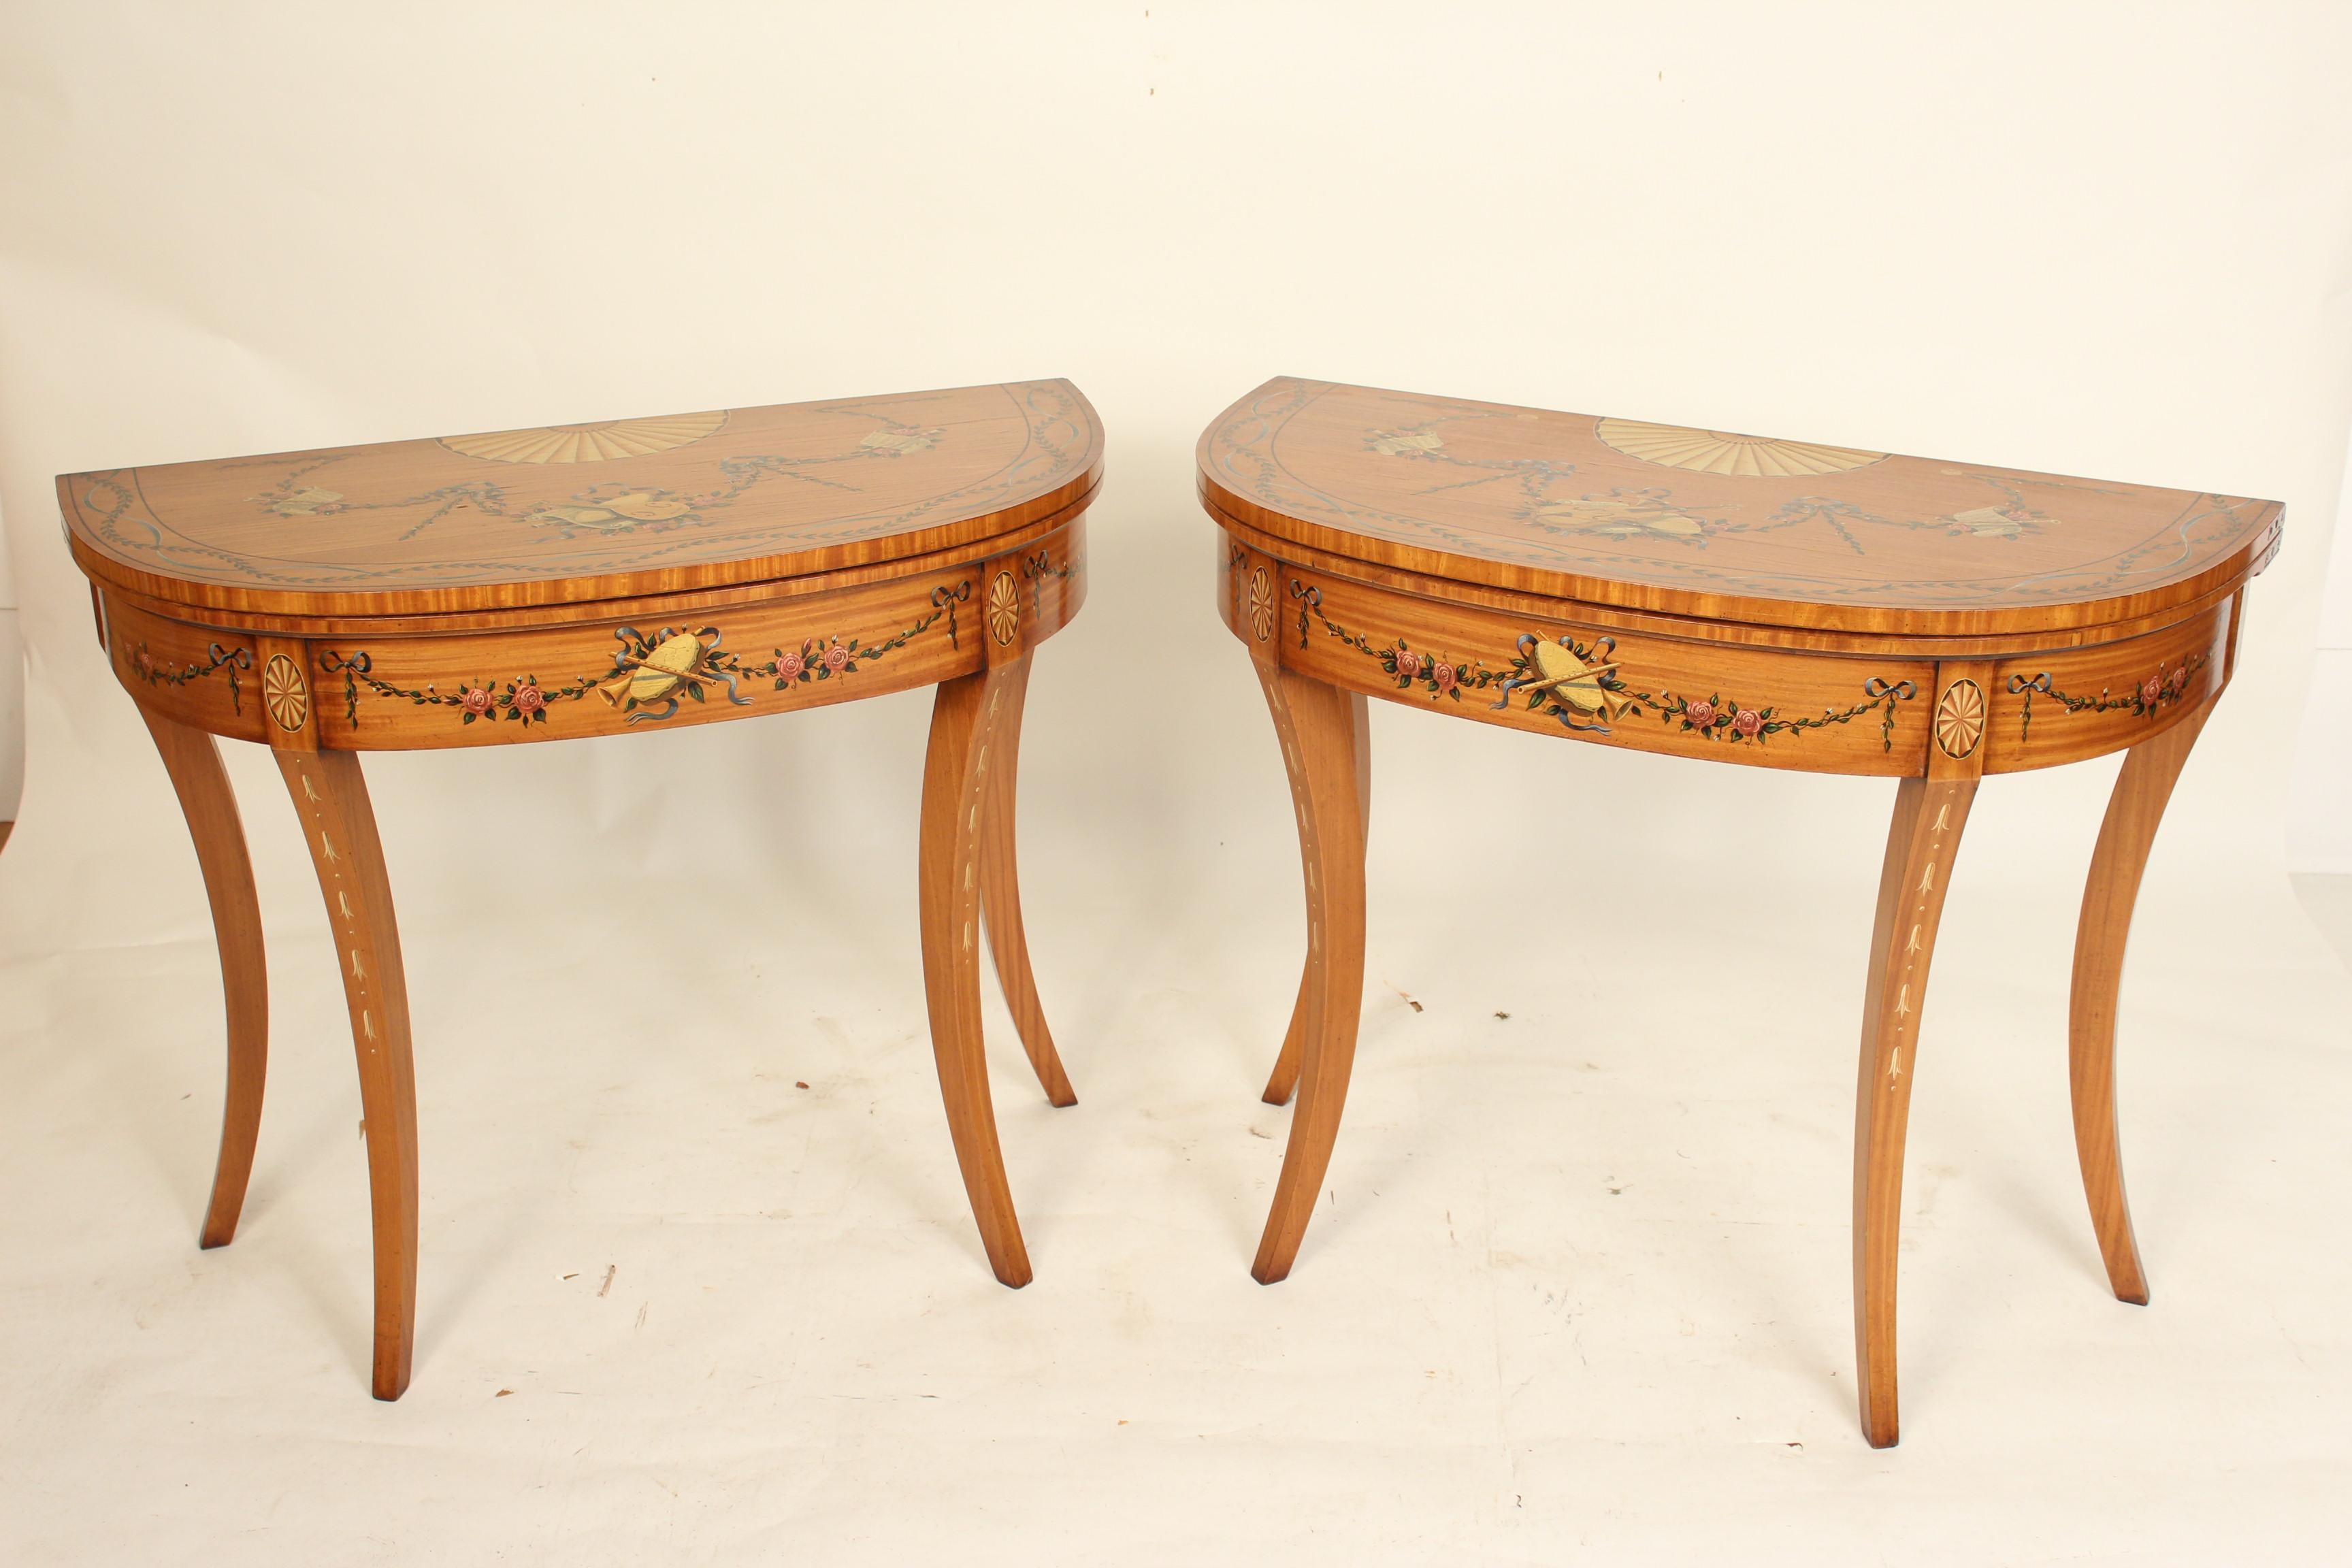 Pair of English Edwardian style painted satinwood, demilune shaped, console games tables, mid-20th century. Paint decorated with floral and musical trophies. Inside games surface is green felt.